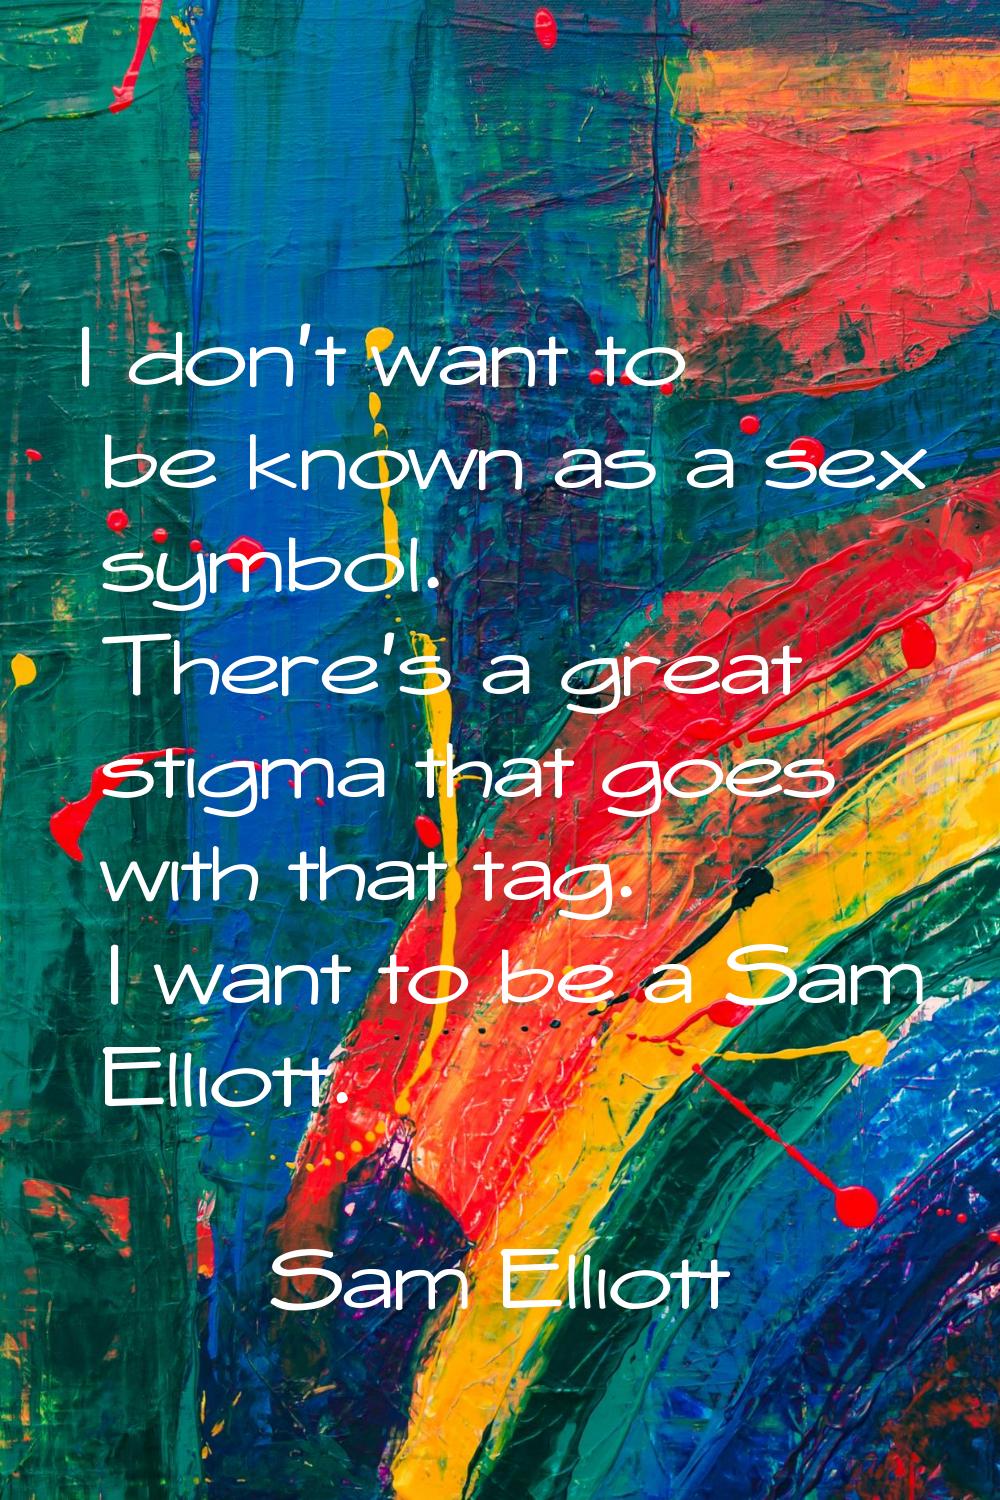 I don't want to be known as a sex symbol. There's a great stigma that goes with that tag. I want to